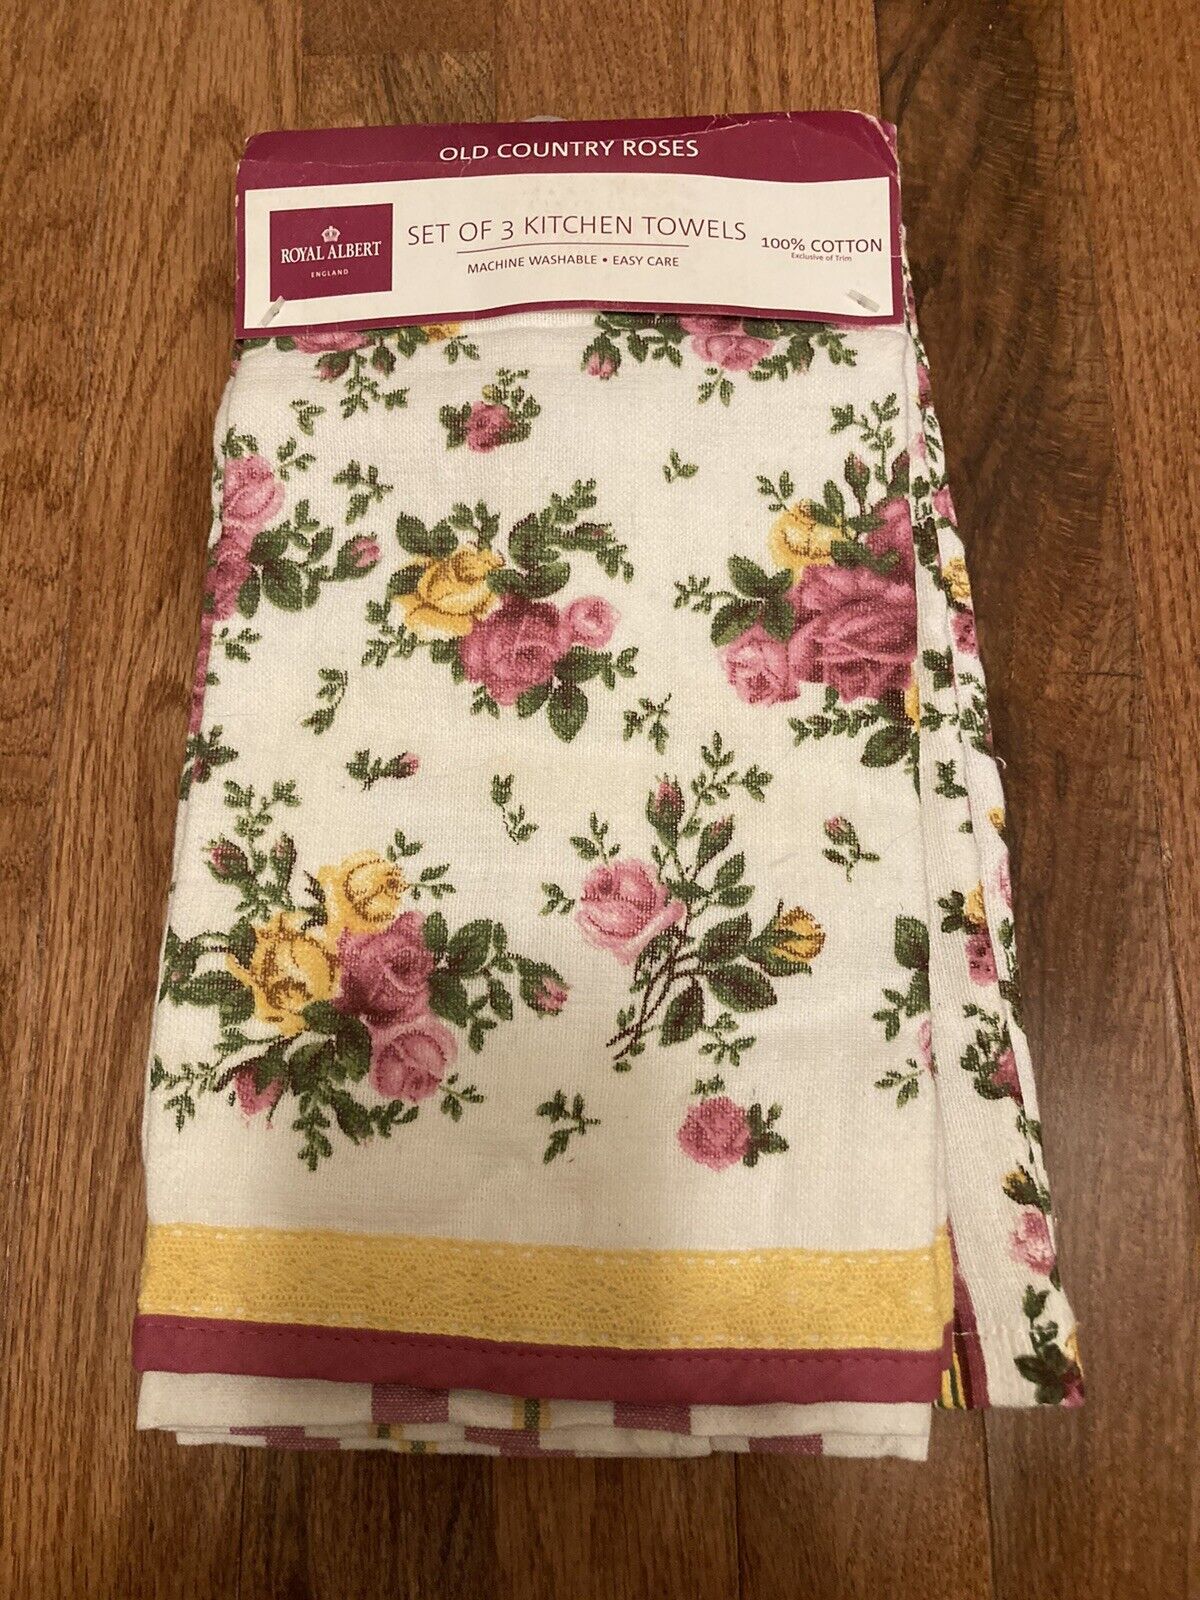 NWT Royal Albert Old Country Roses 3pc Towel Set 100% Cotton